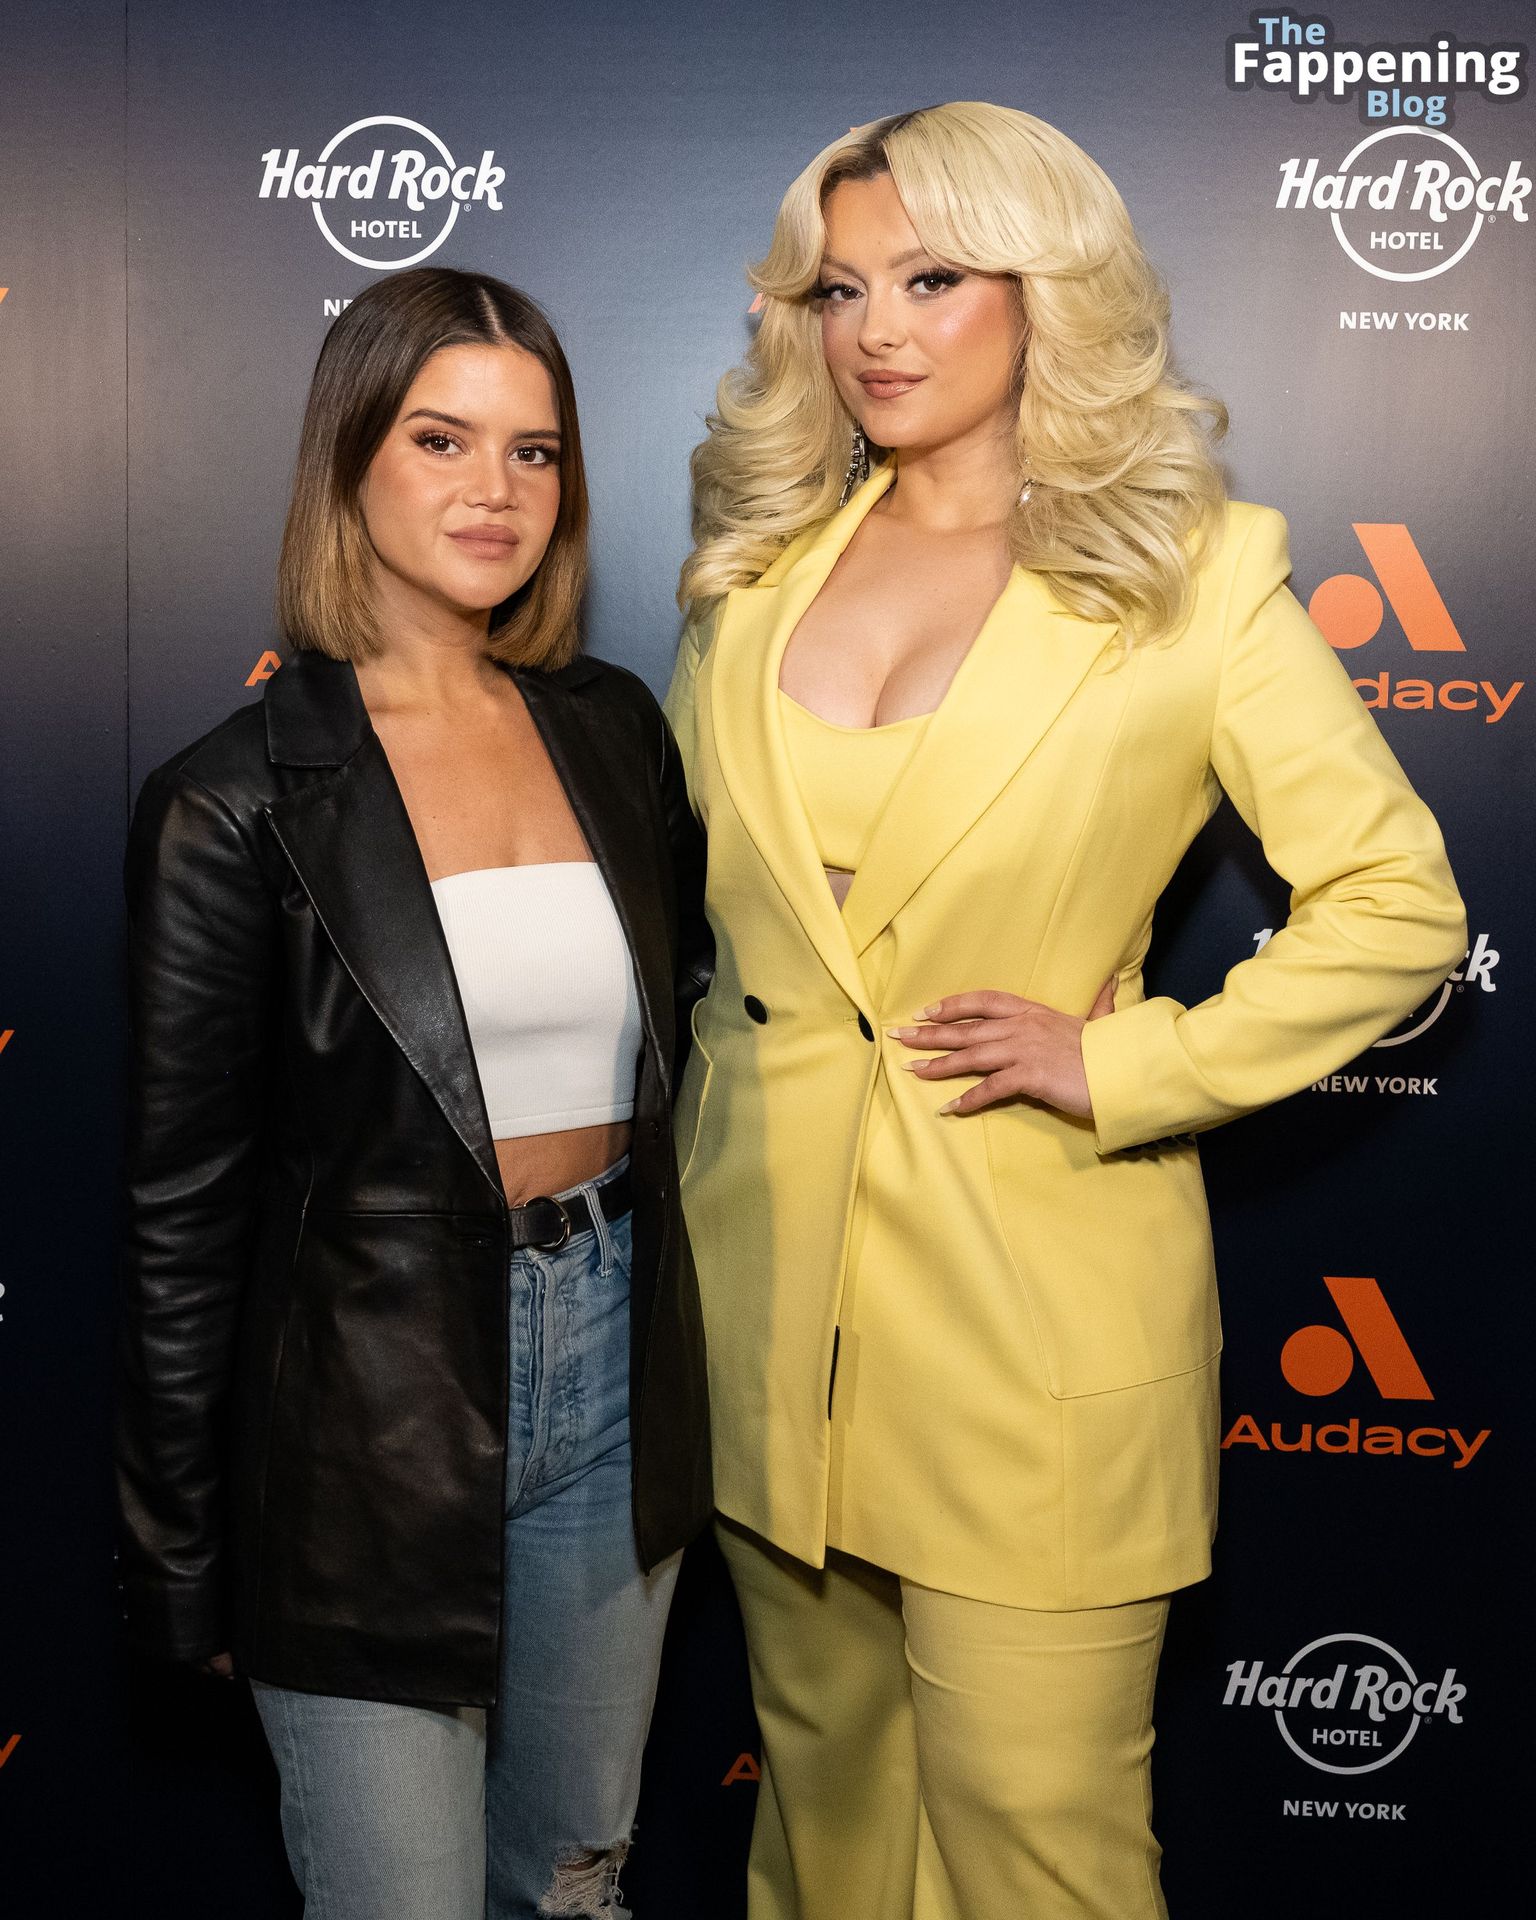 Bebe Rexha Displays Her Cleavage on the Red Carpet for Audacy’s “Leading Ladies” Event in NY (38 Photos)